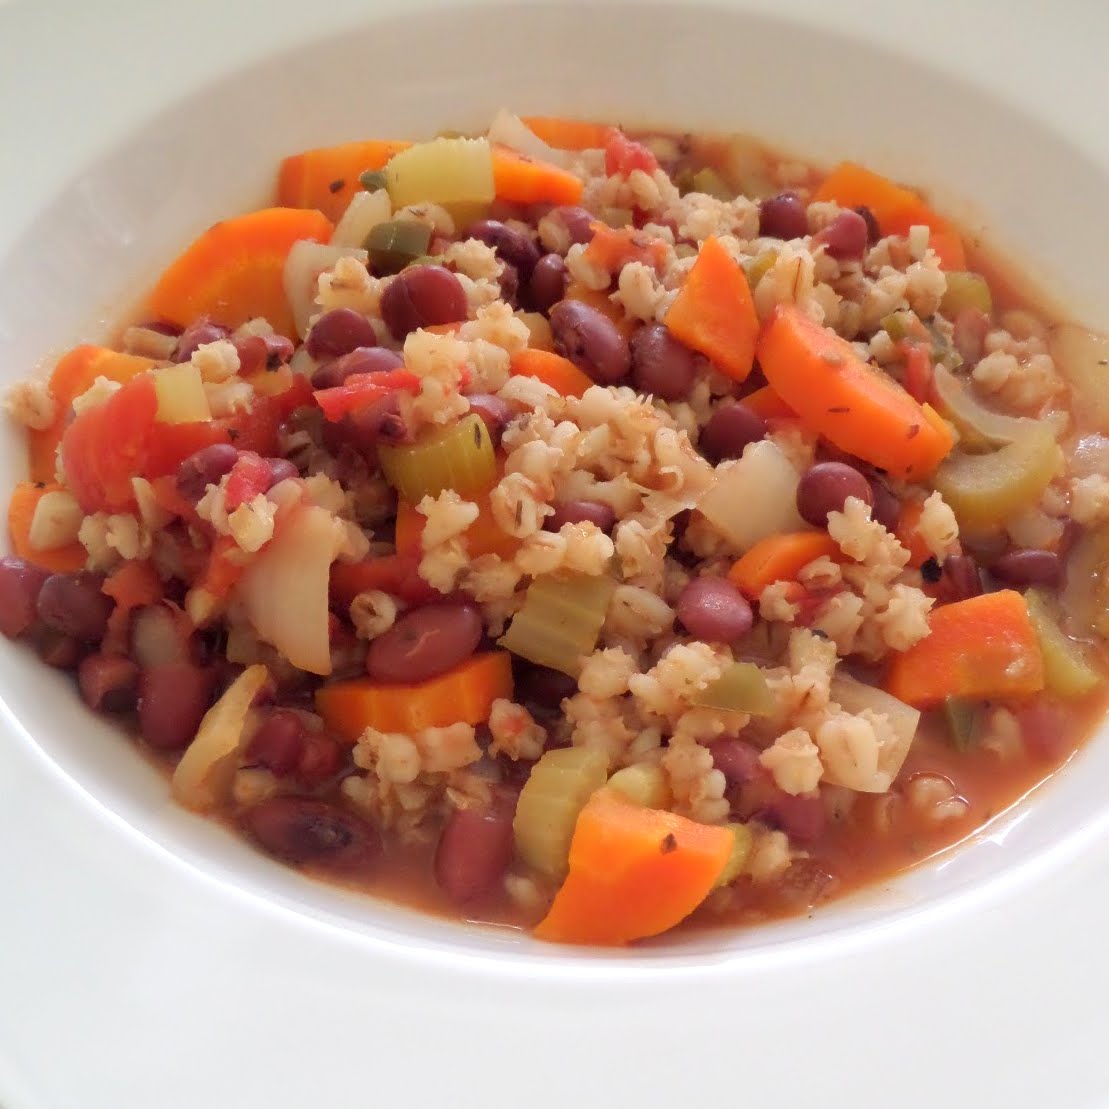 Bean and Barley Stew:  A healthy, meatless, stew with beans, barley, and veggies.